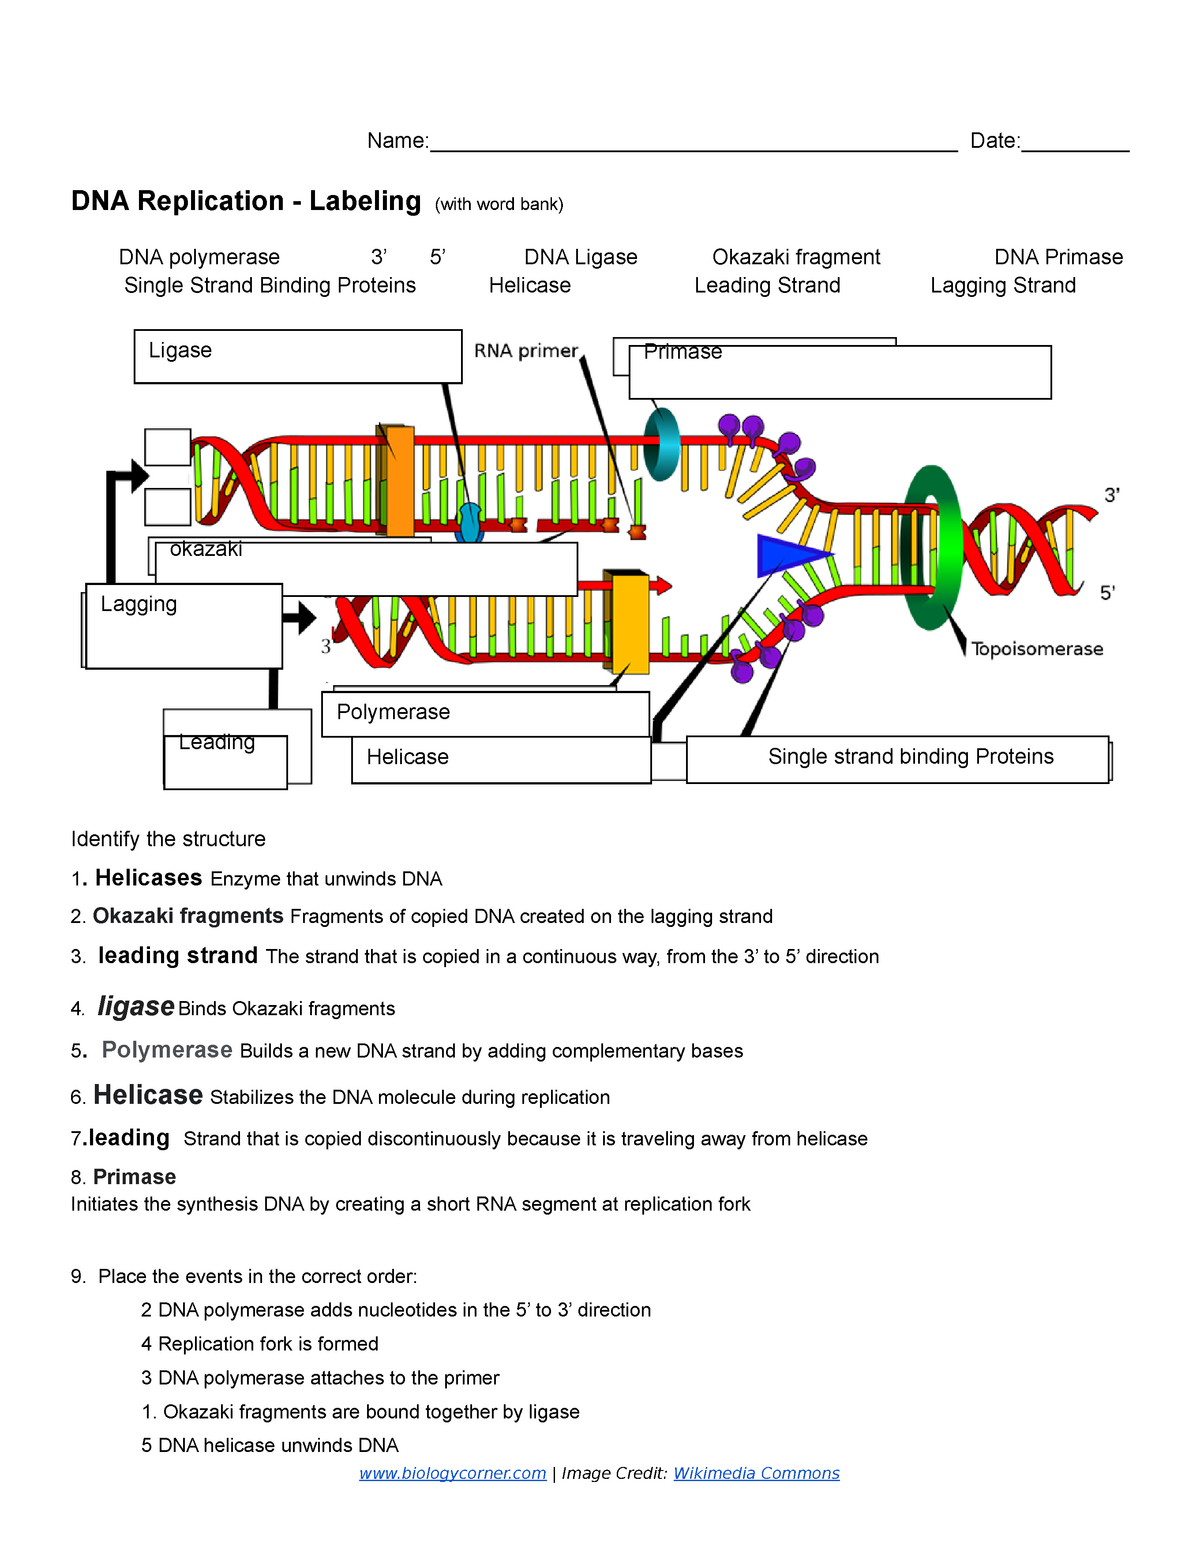 Copy of DNA Replication - Labeling 11 - Name: - StuDocu Within Dna Replication Worksheet Key